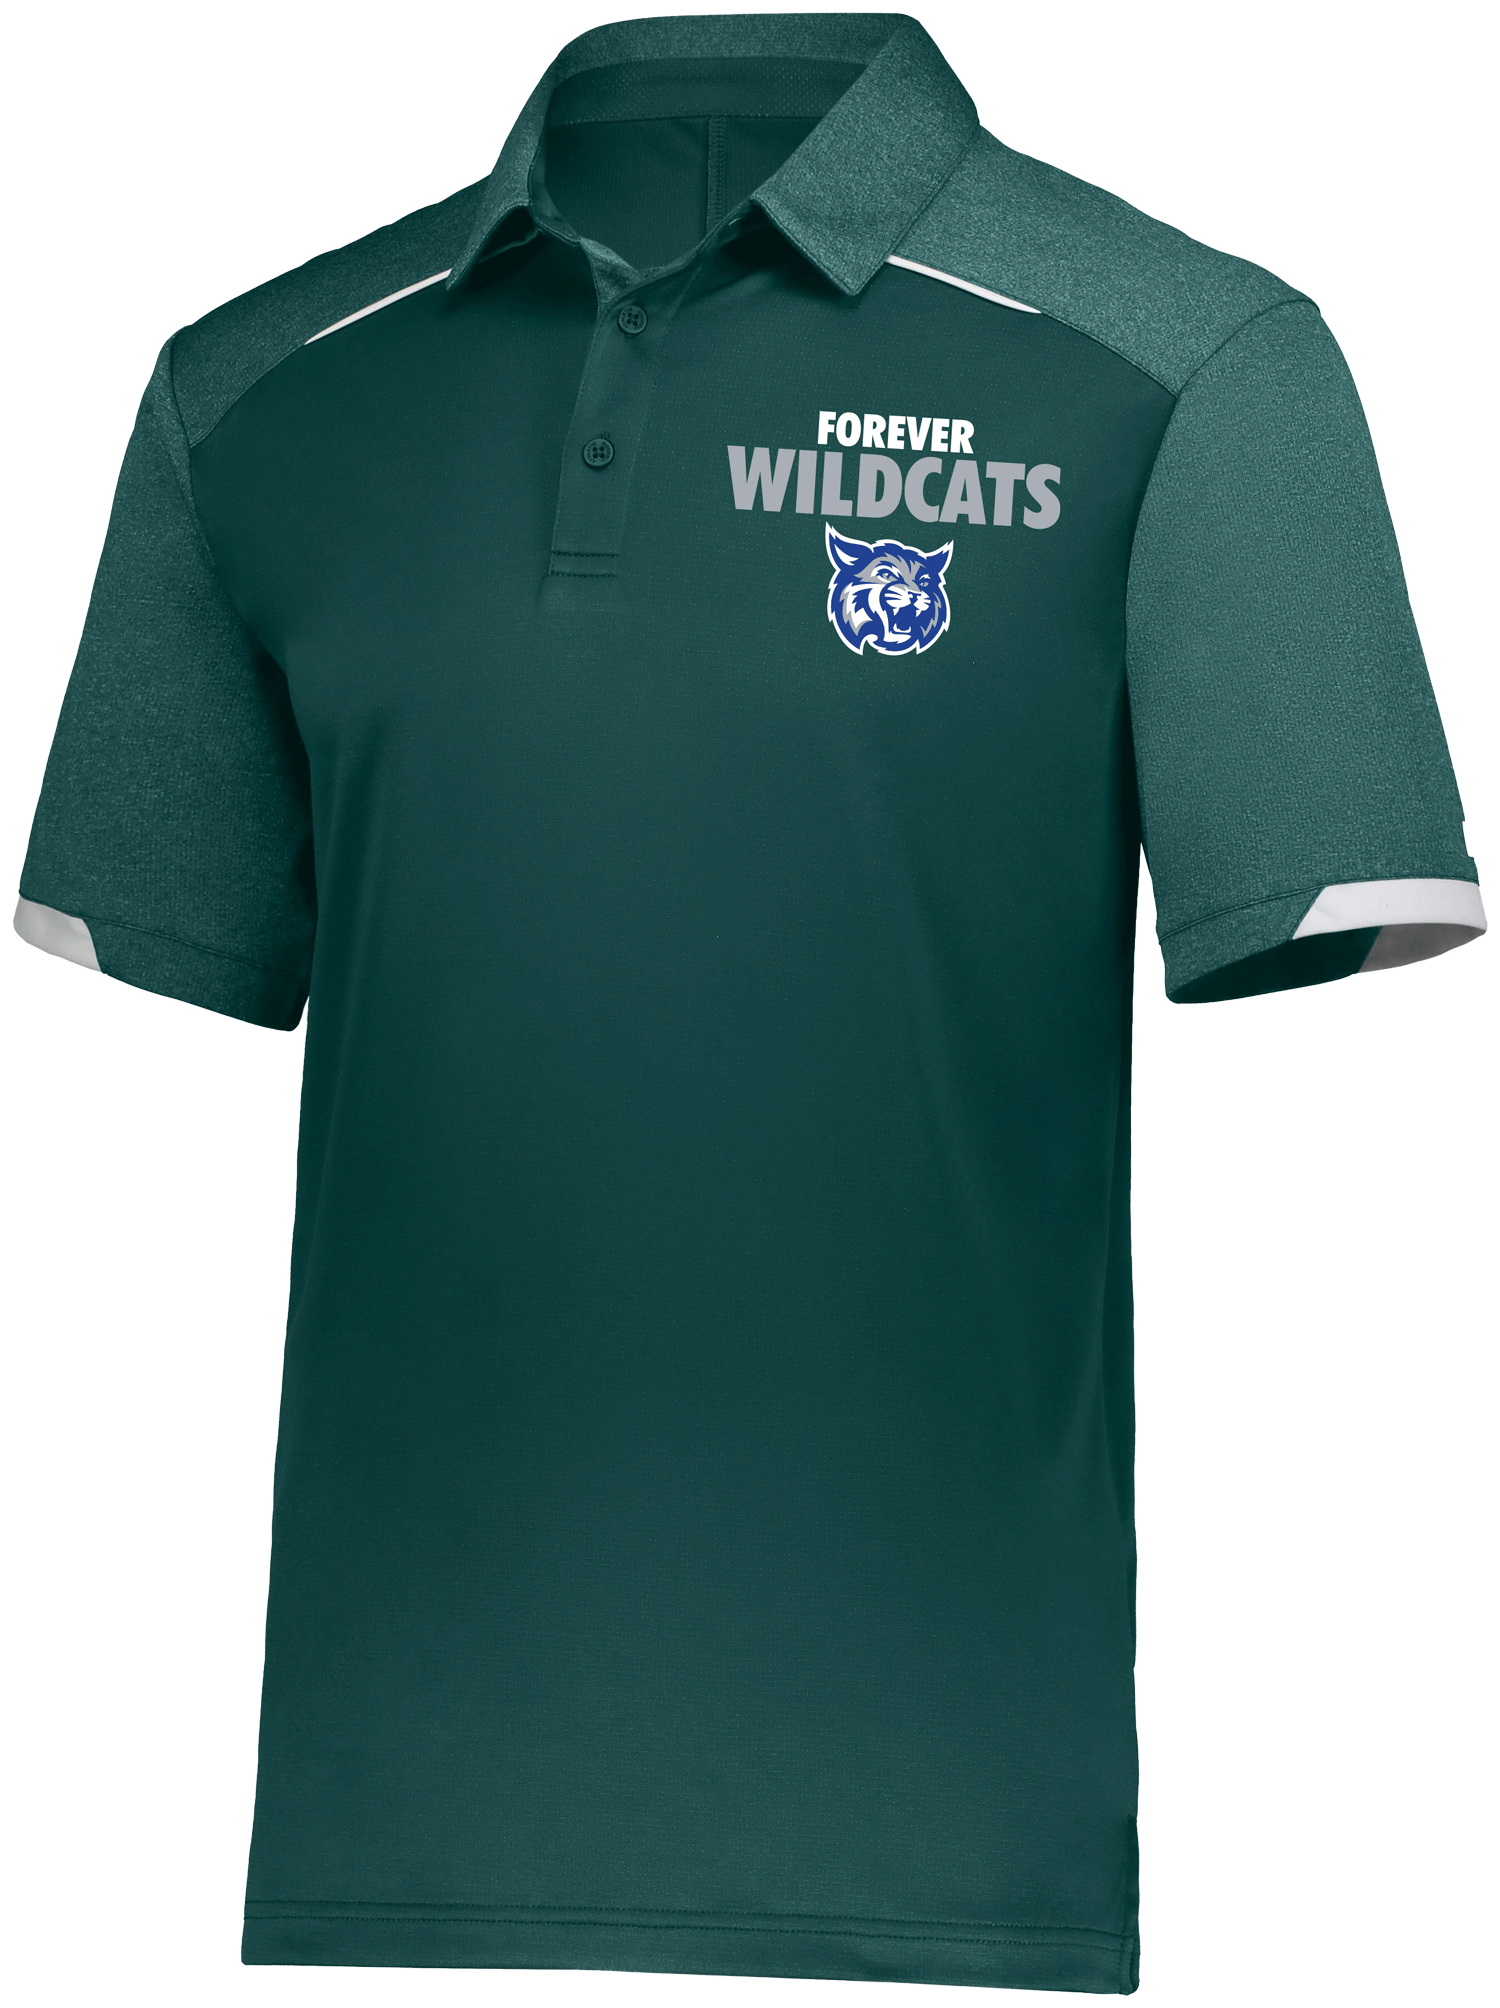 legend-polo-dark-green.png